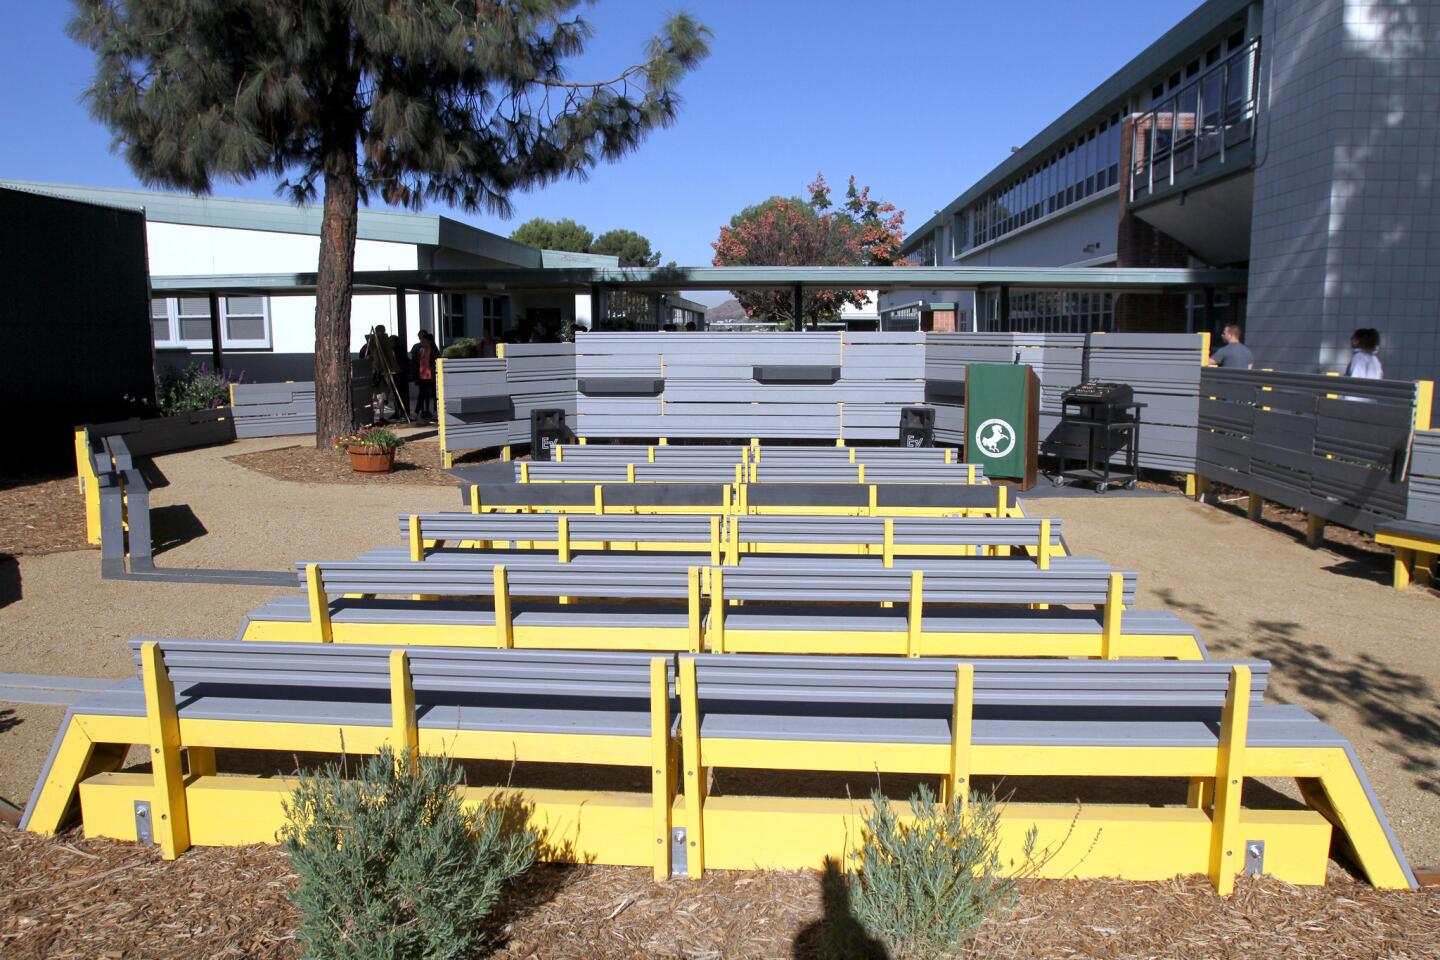 A new outdoor classroom was dedicated at John Muir Middle School, in Burbank on Friday, October 21, 2016. The classroom was made possible with the assistance of Woodbury University architectural students, who designed and built the composite wood classroom and Nickelodeon volunteers, who did the landscaping.